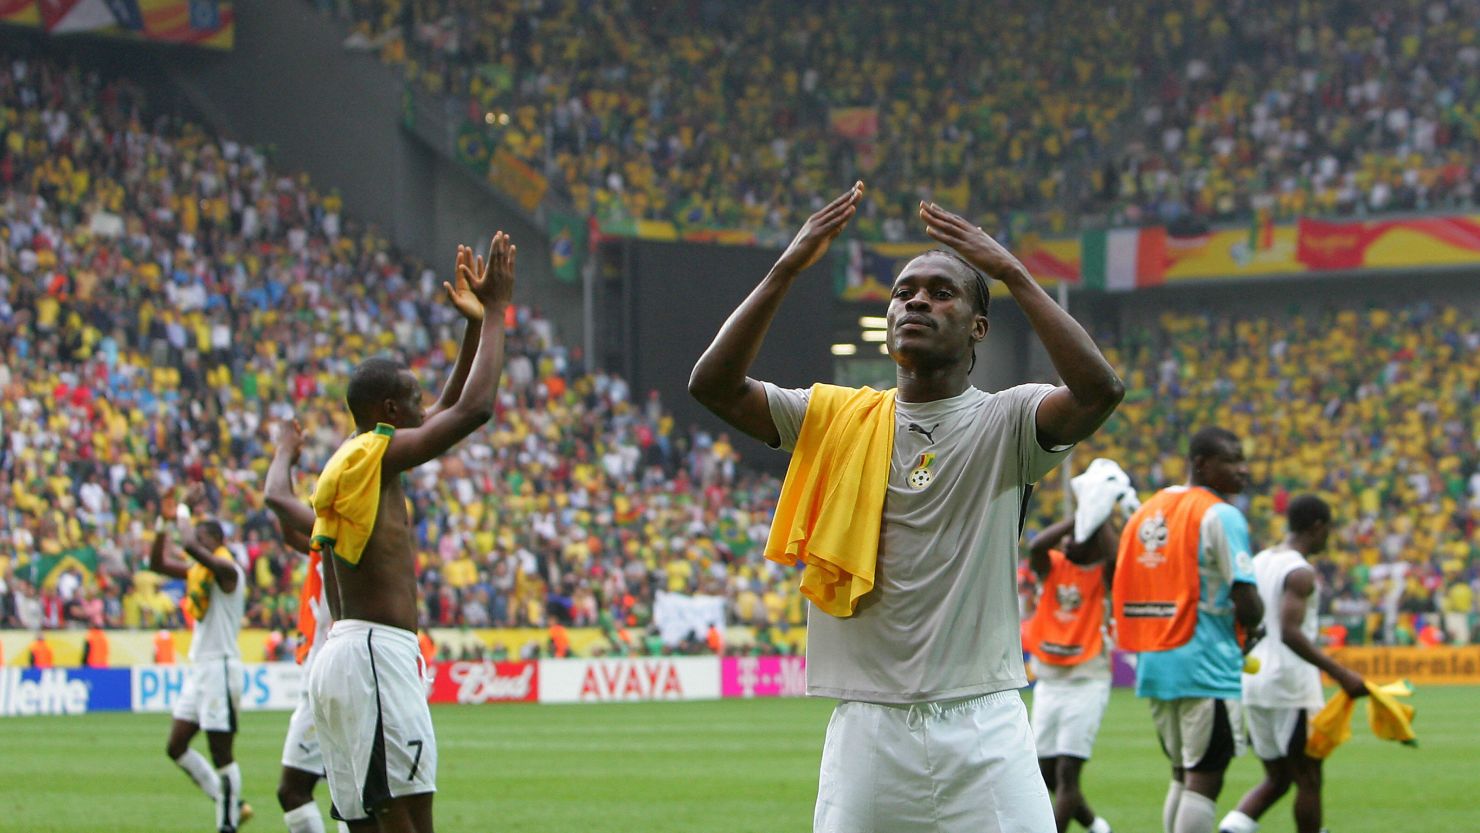 Derek Boateng thanks supporters after Ghana's World Cup round of 16 match against Brazil in Dortmund, Germany, in June 2006.